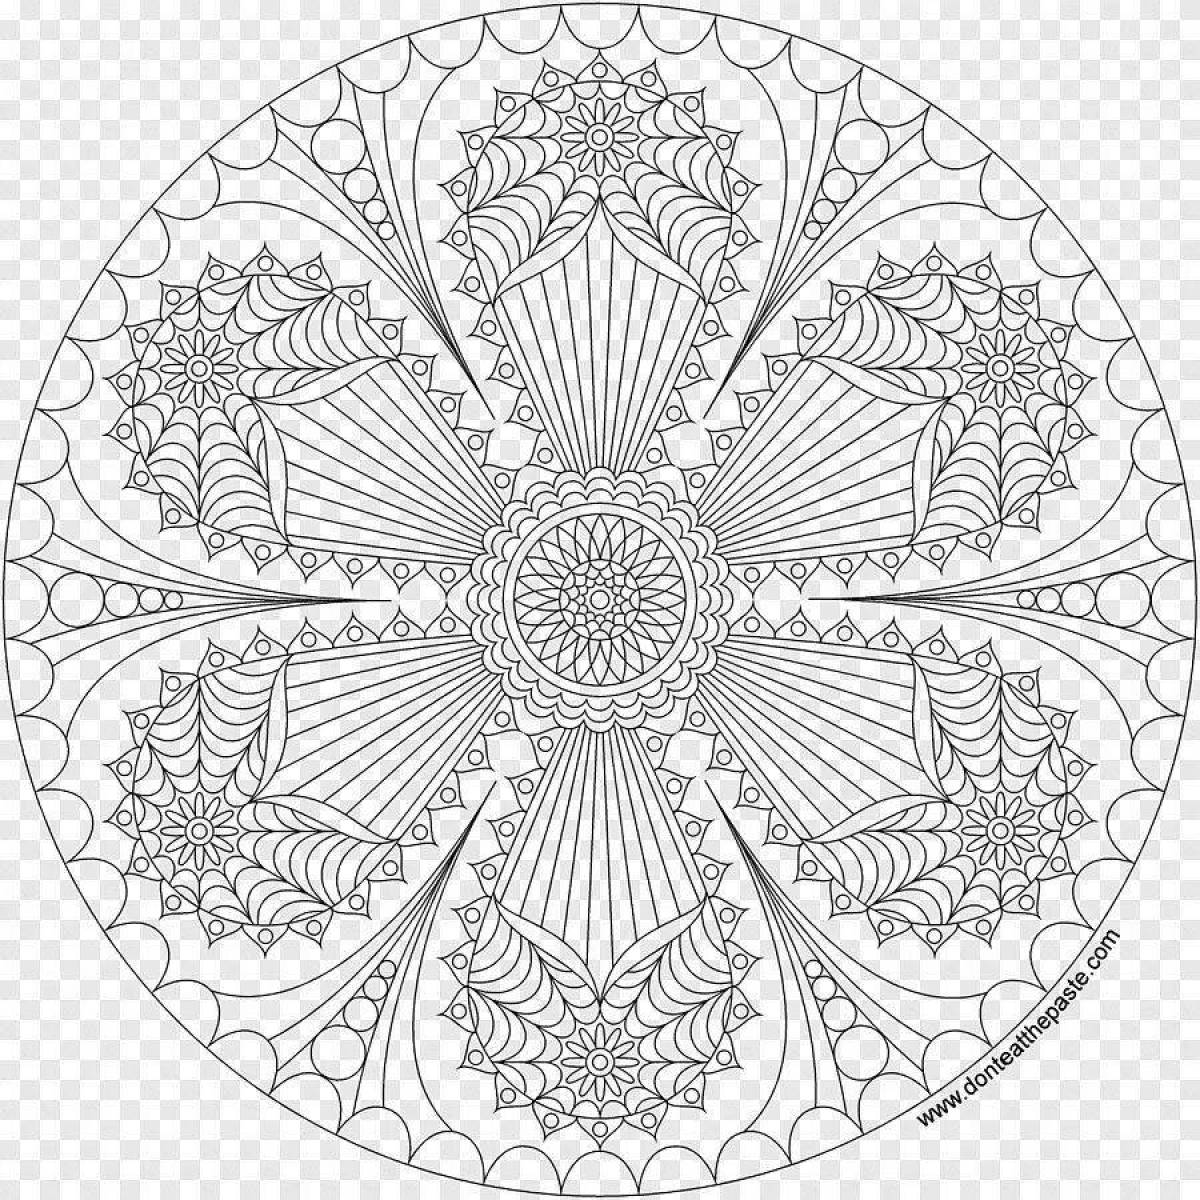 Radiant coloring page antistress mandala for adults en